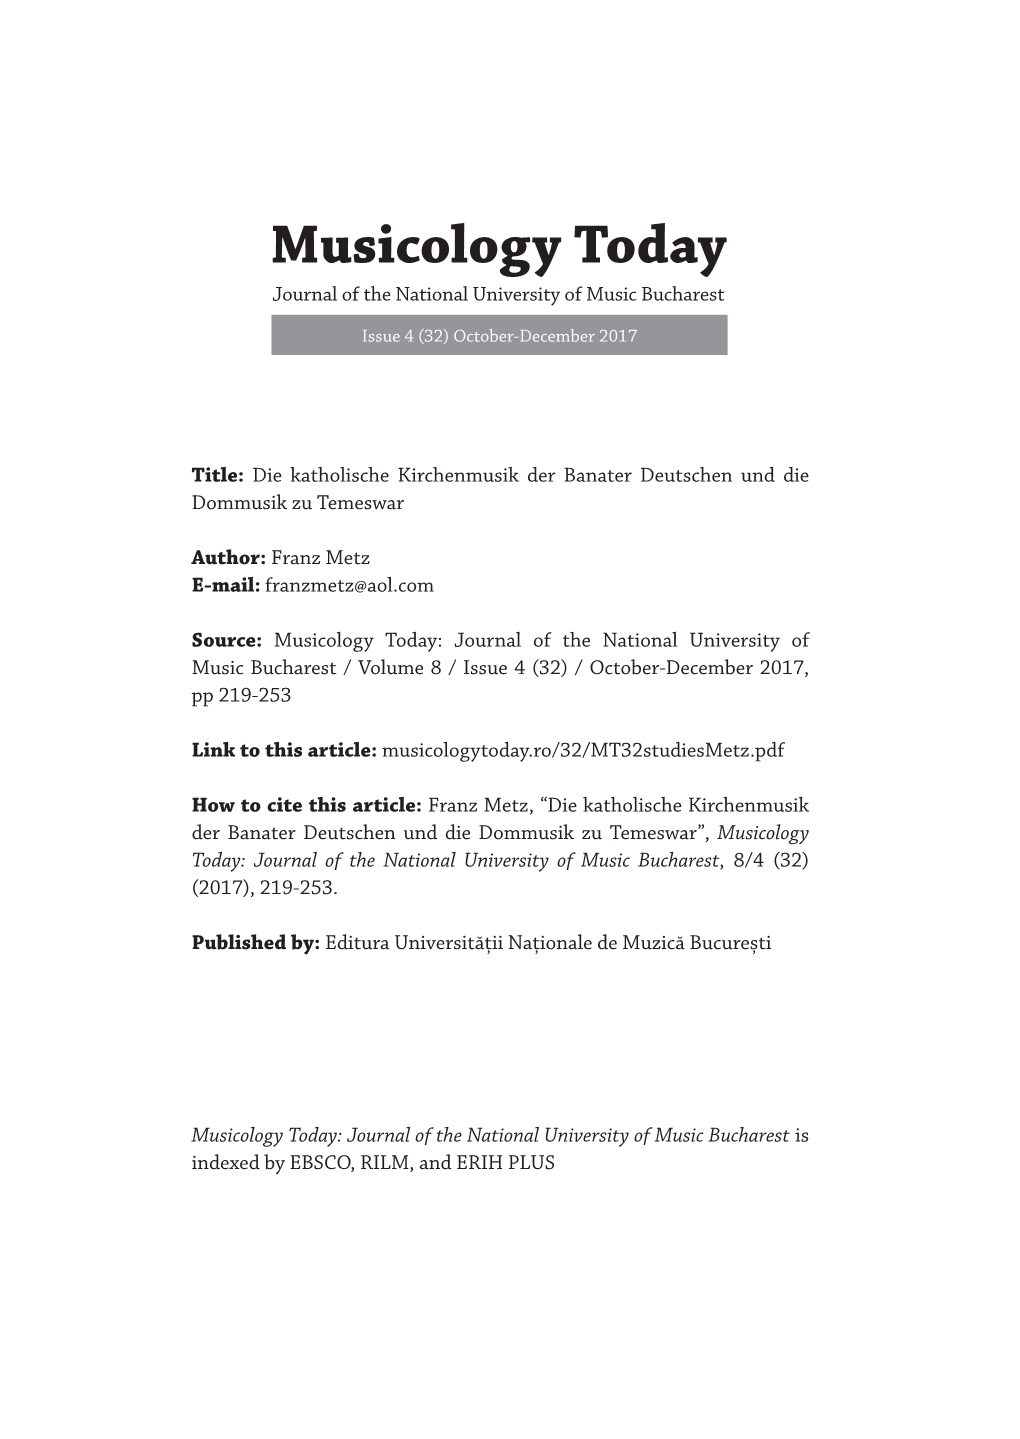 Musicology Today Journal of the National University of Music Bucharest